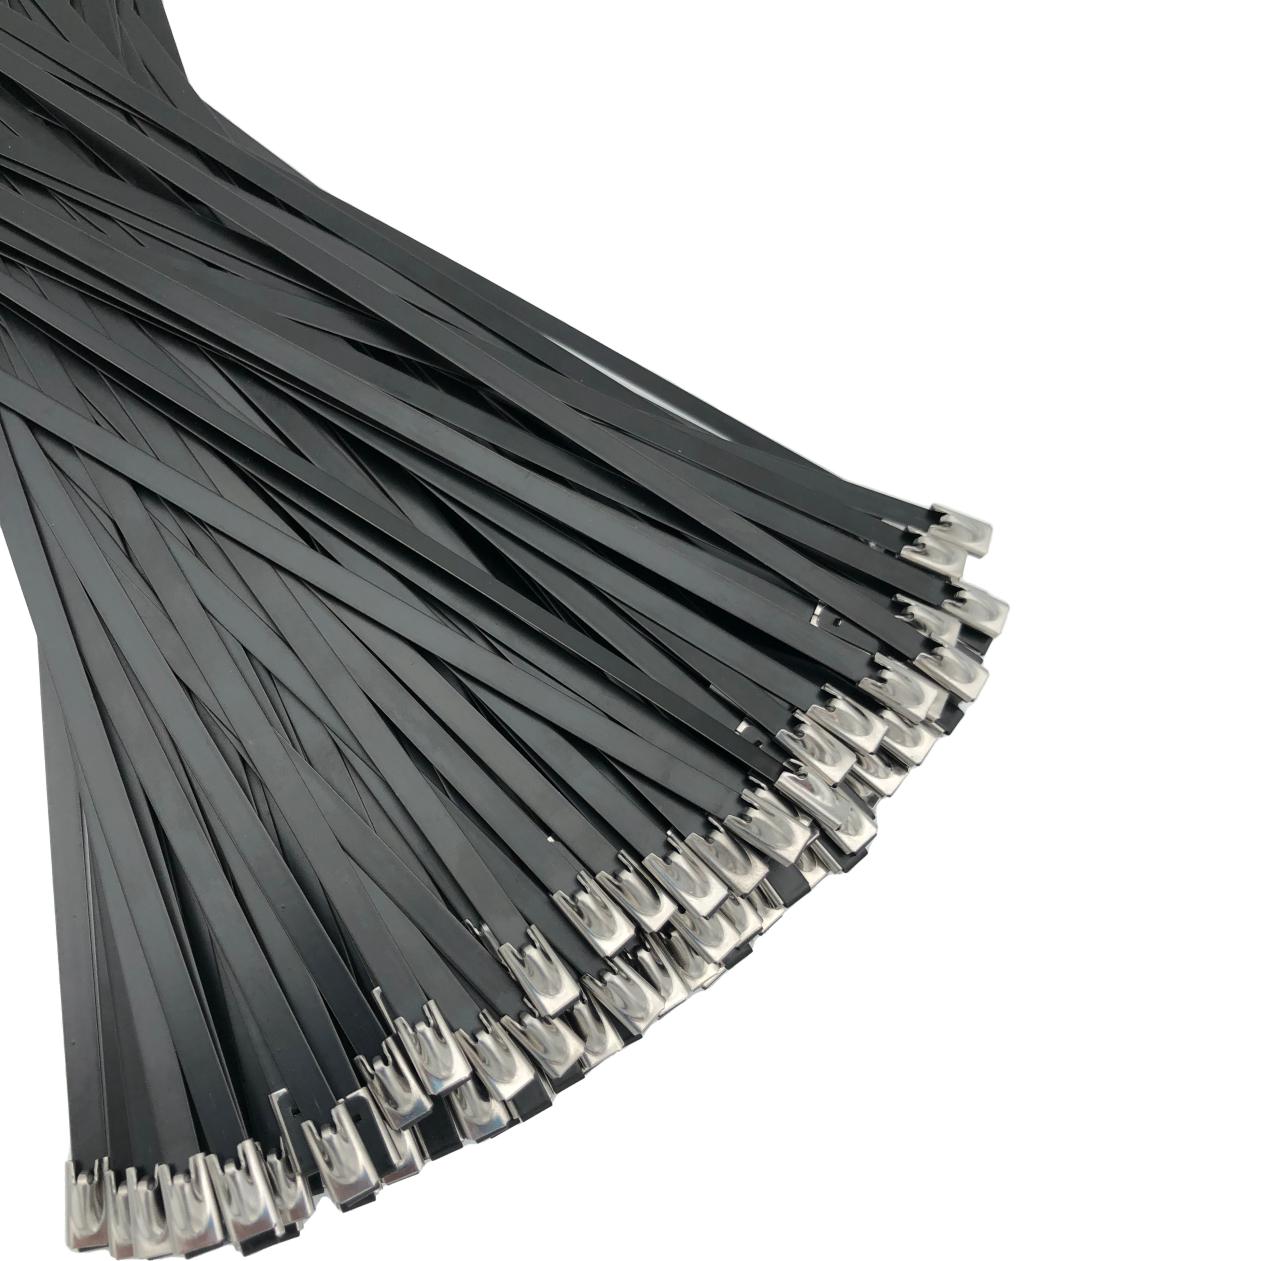 High-Quality Black Stainless Steel Cable Ties for Durable Solutions